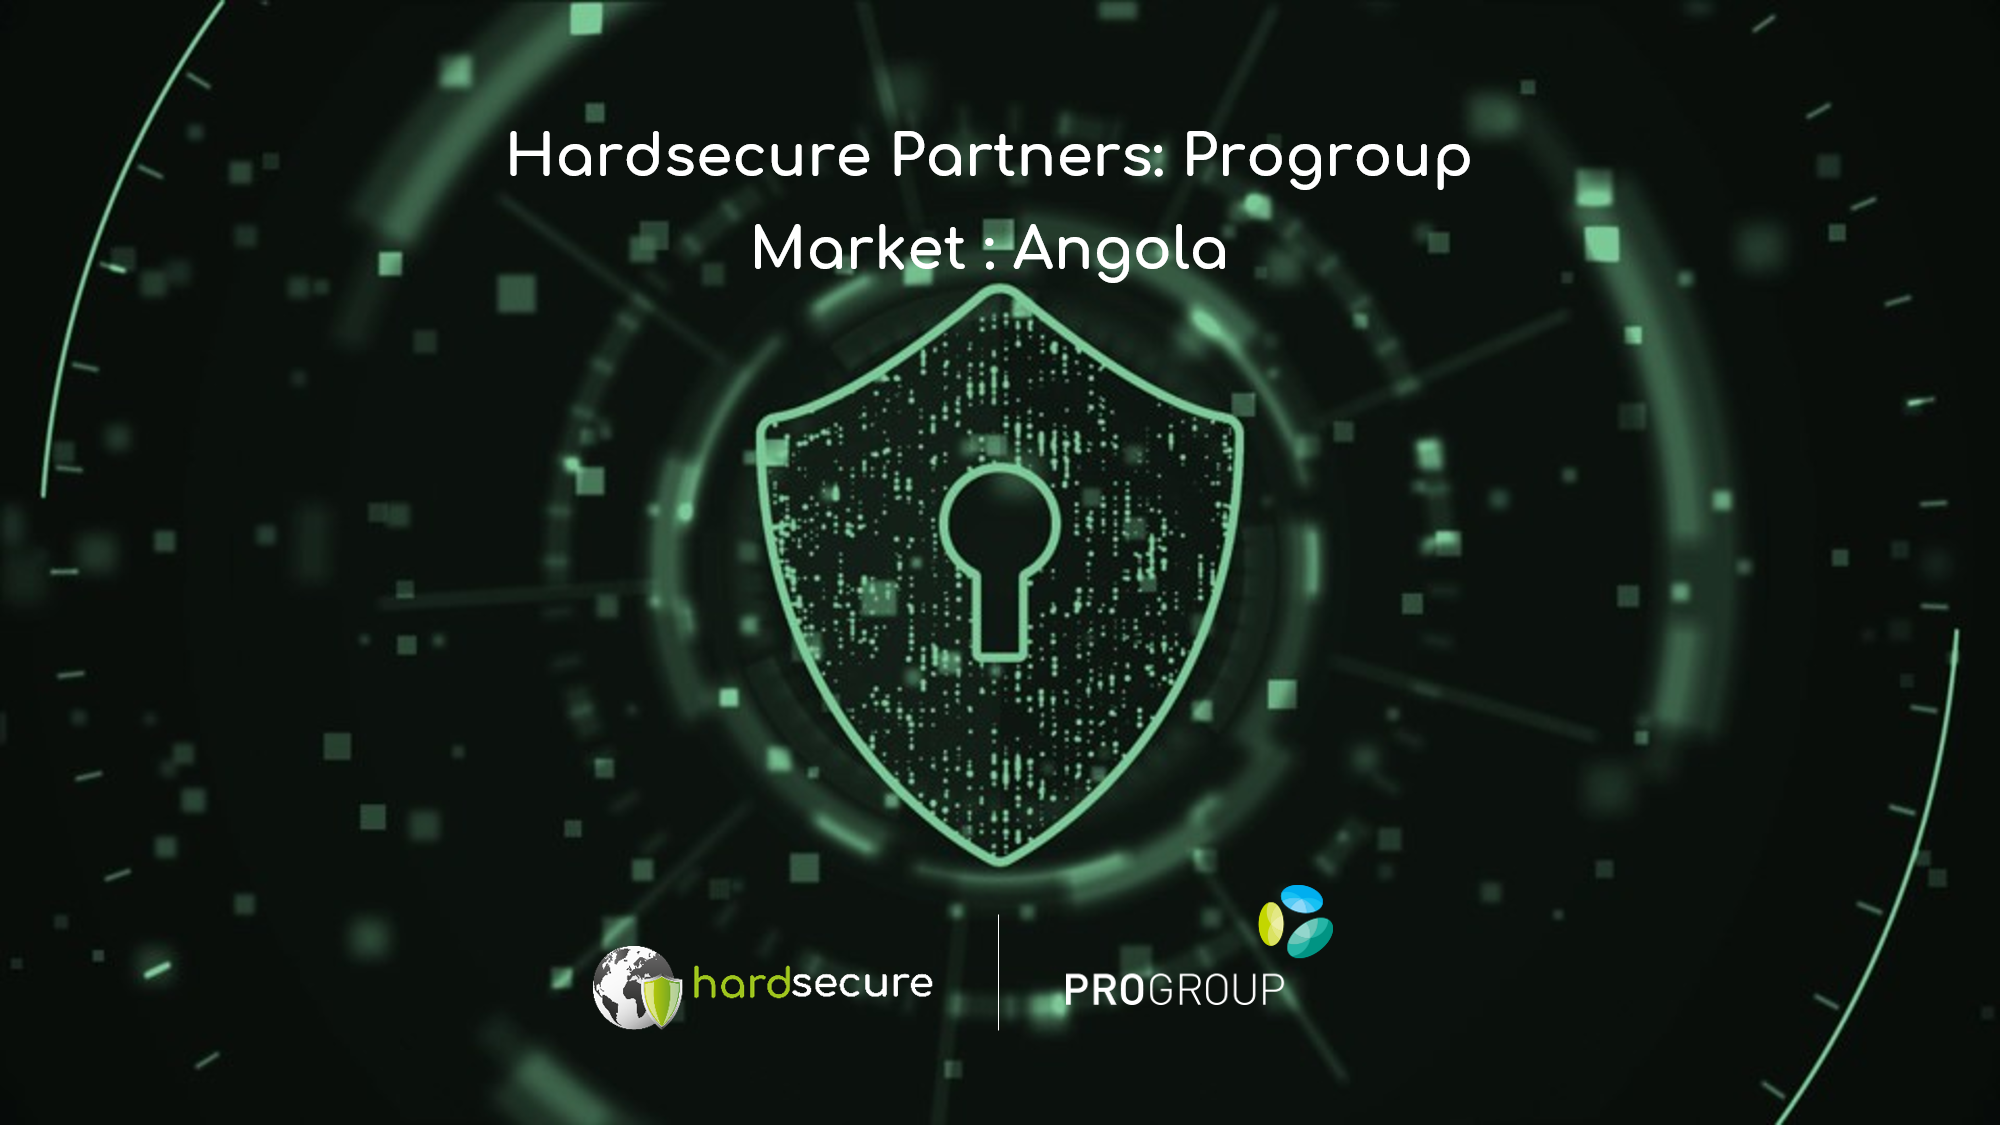 Hardsecure partners with Progroup in the Angolan market